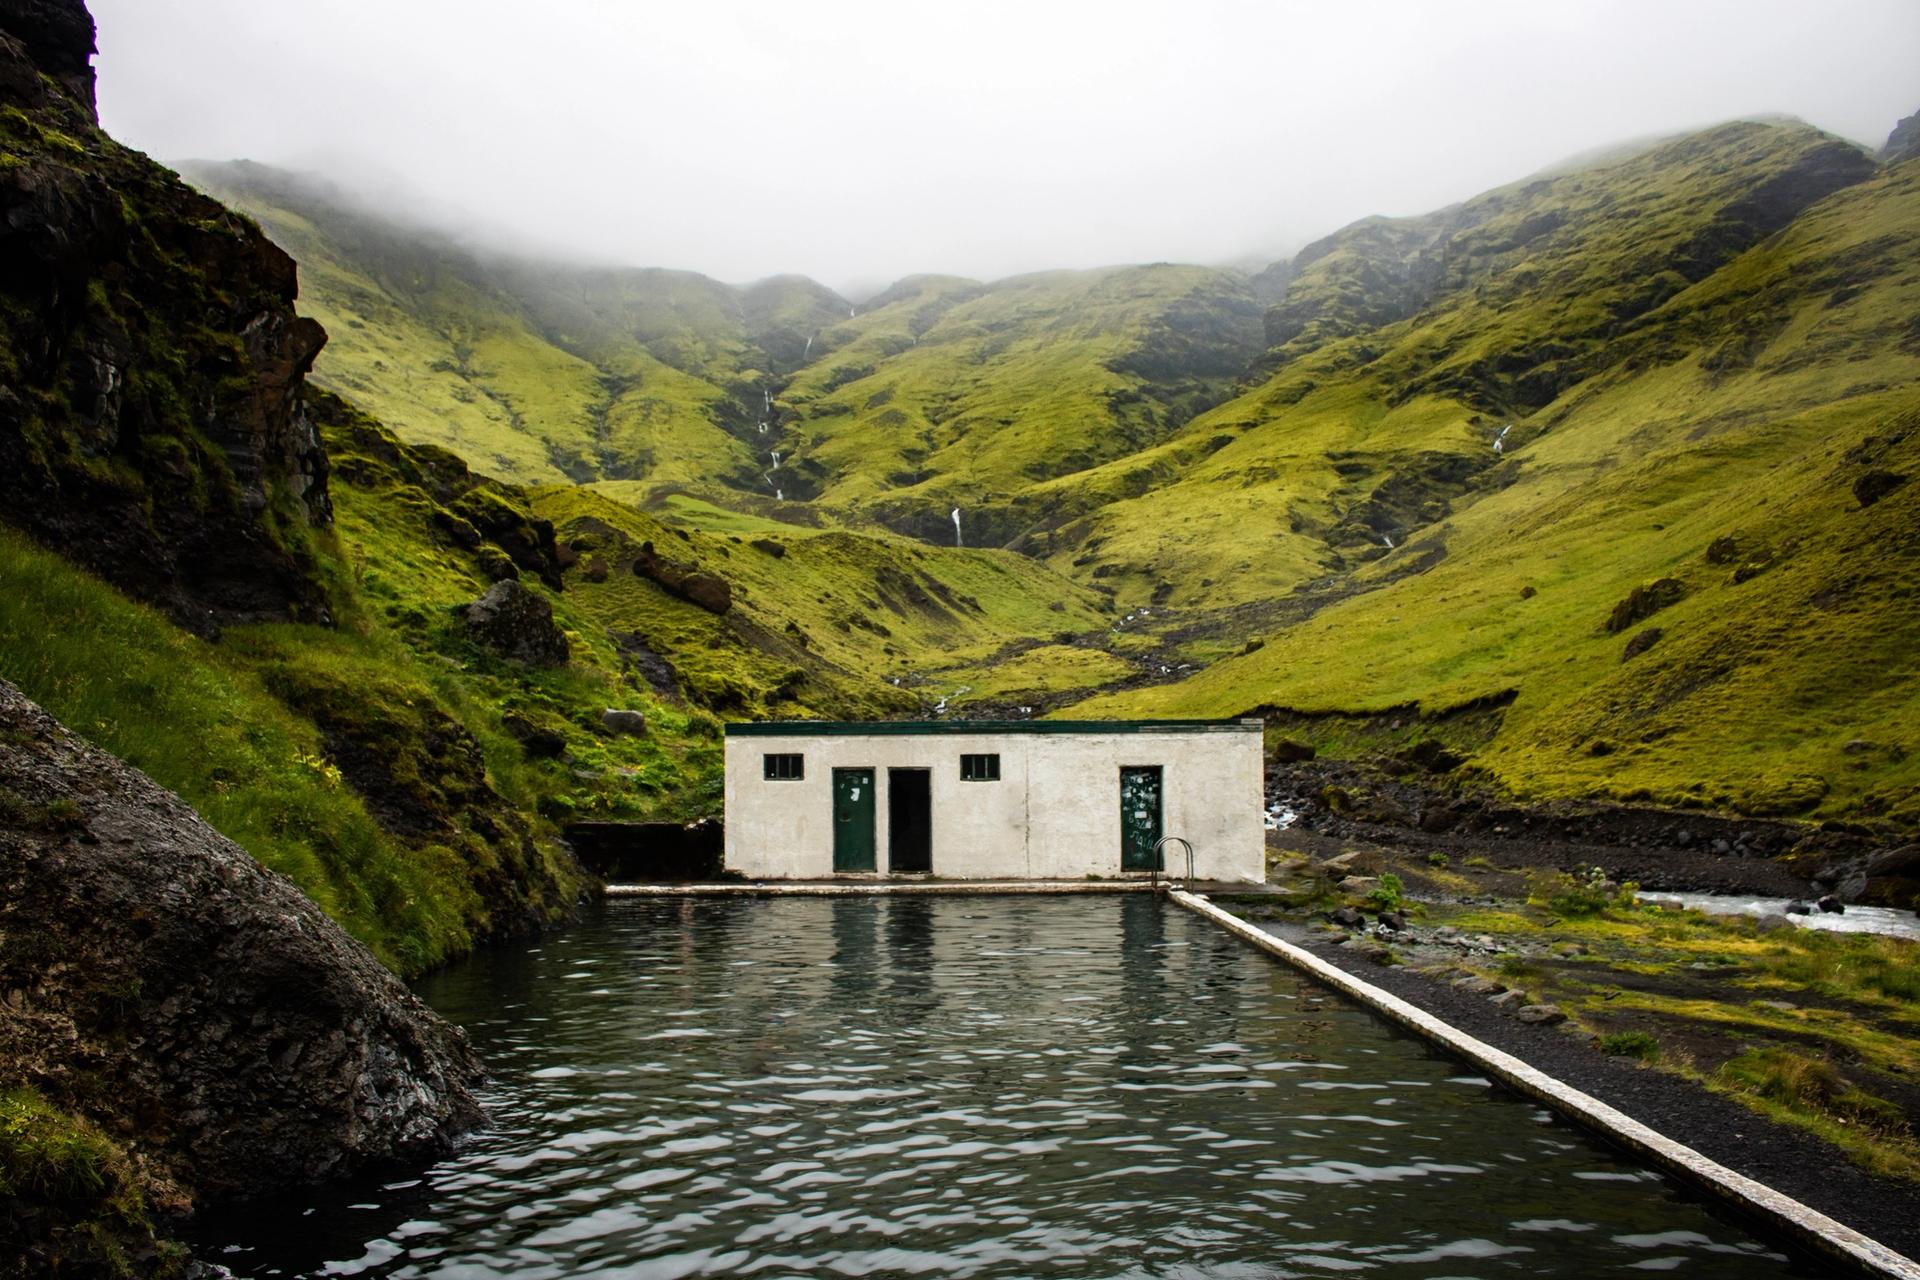 Seljavallalaug Hot Spring in Iceland in the middle of nowhere surrounded by green grass and mountains